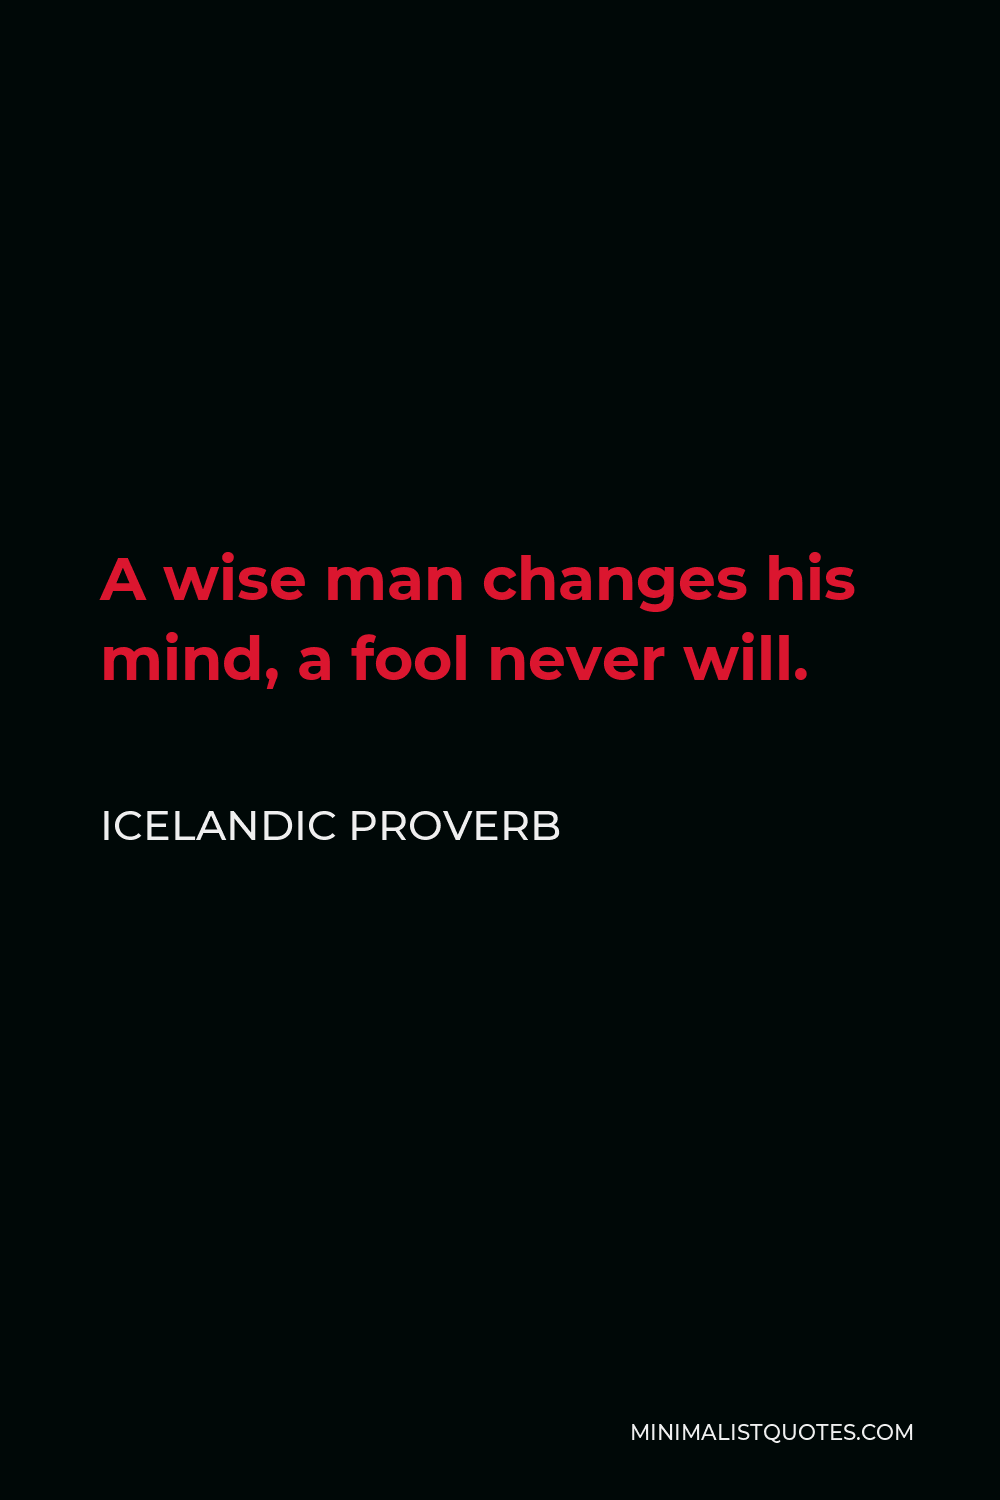 Icelandic Proverb Quote - A wise man changes his mind, a fool never will.